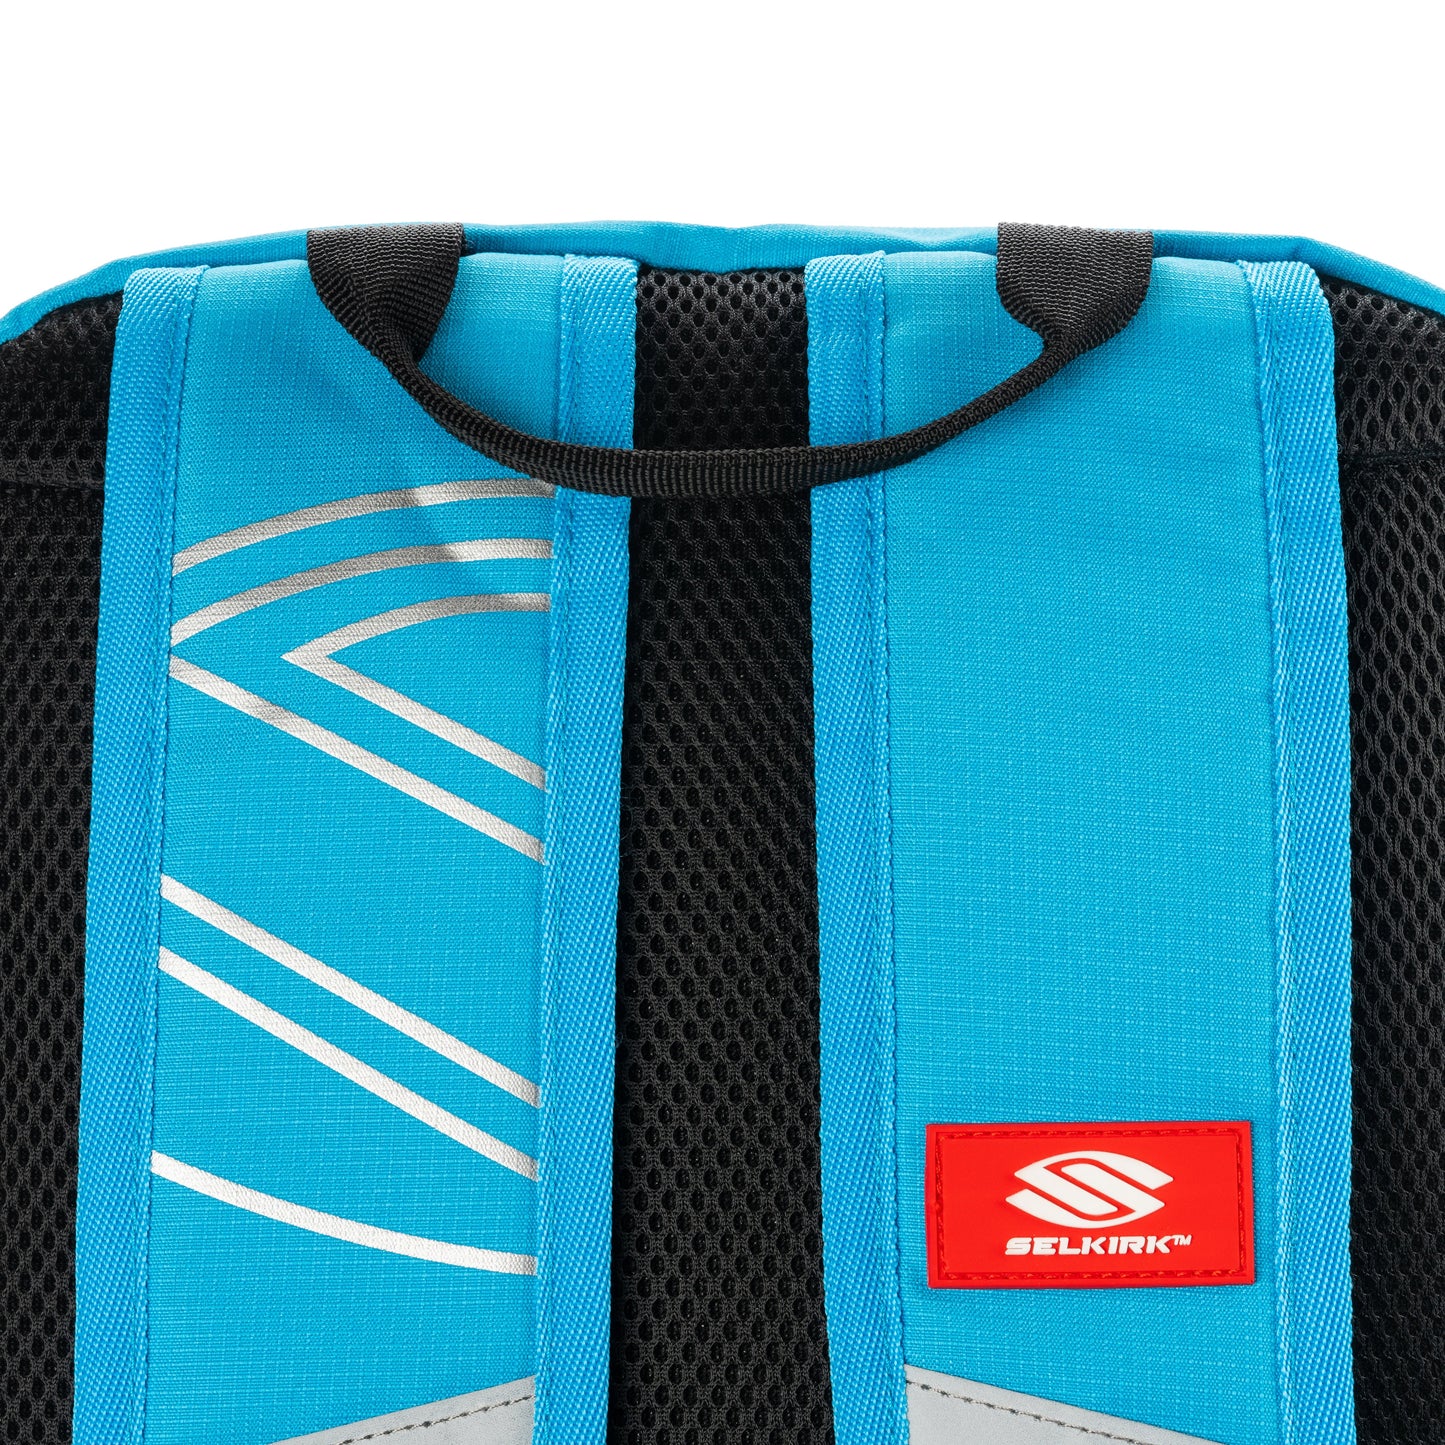 The back of a Selkirk Core Series Day Backpack Pickleball Bag with Selkirk logo on it.